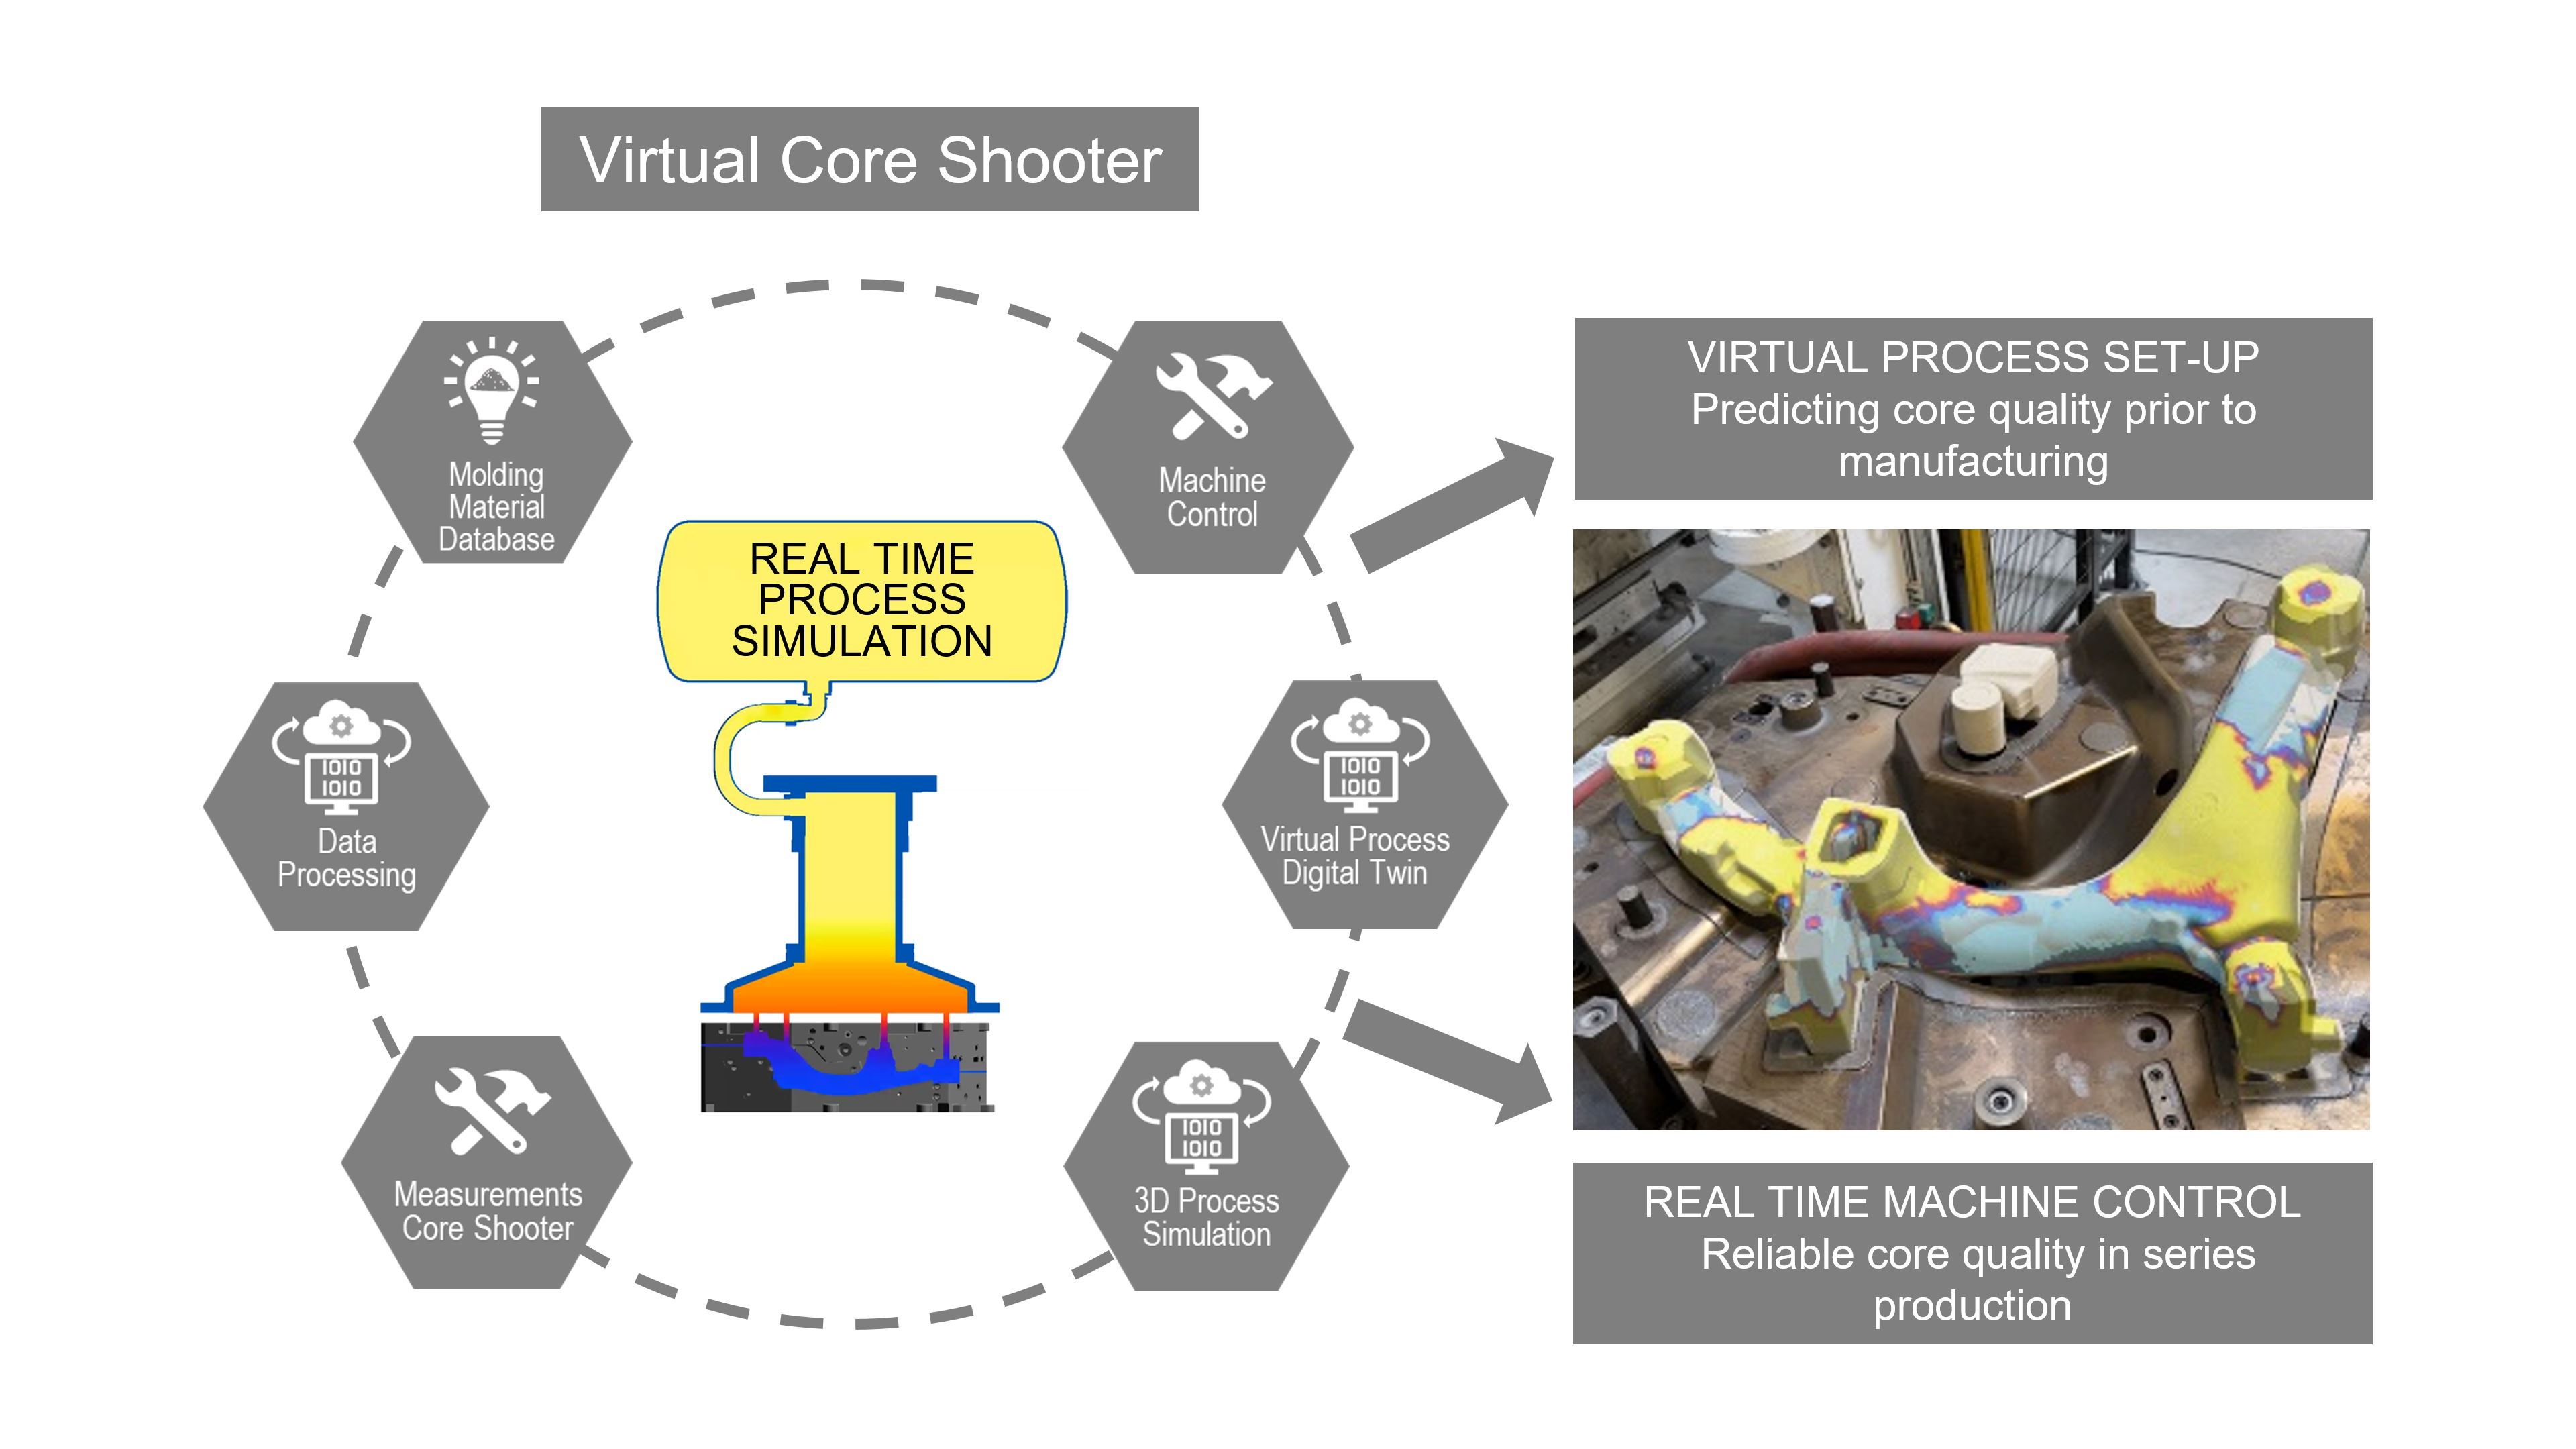 The integrated concept of the Virtual Core Shooter is linking expertise of three market leading companies. 